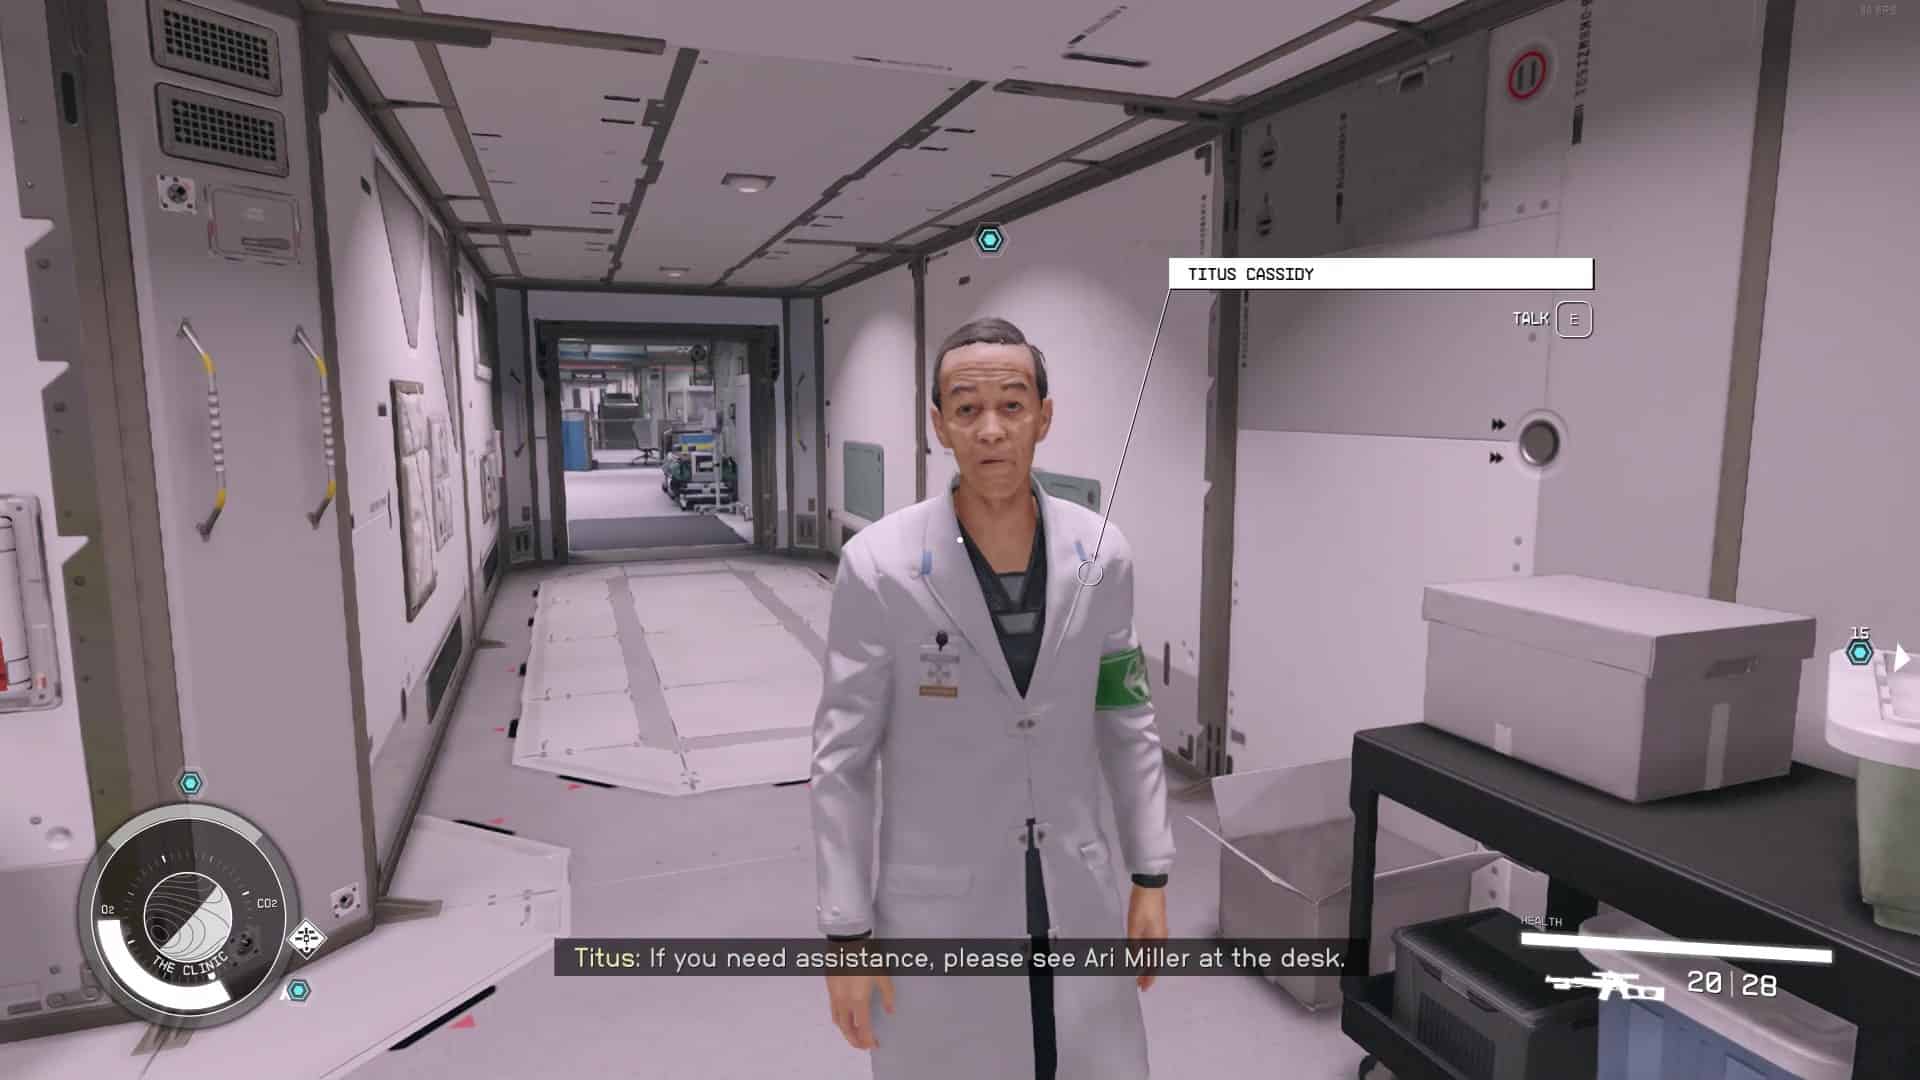 Starfield Surgical Strike: Dr Cassidy standing in a hallway.